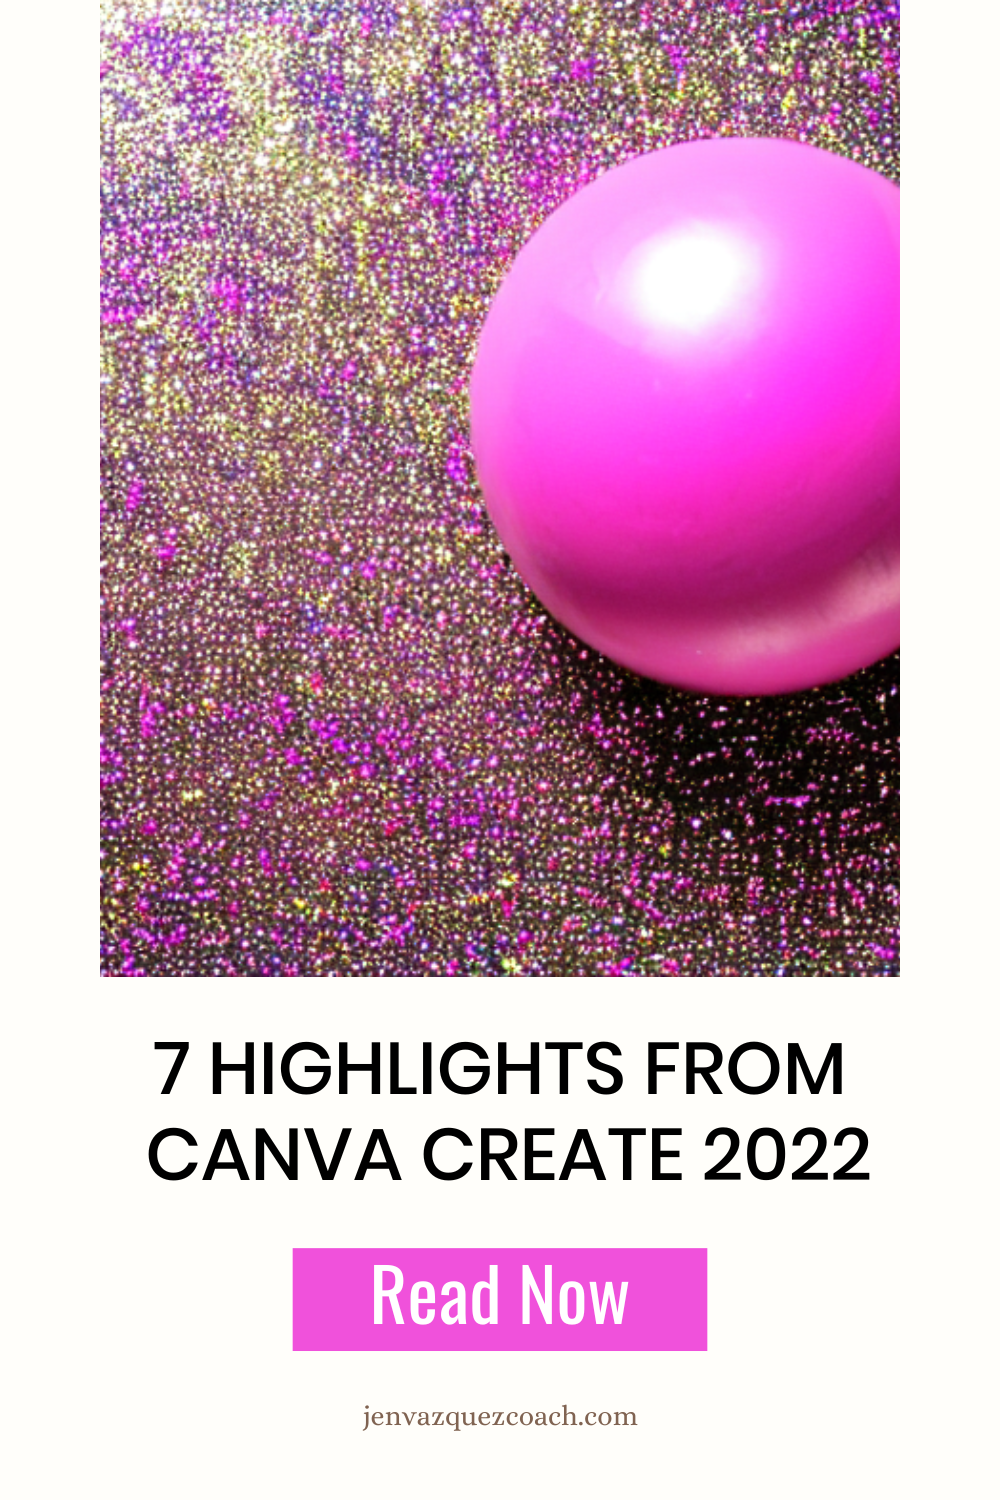 hot pink glossy ball on glittered paper7 Things I'm Excited About from  Canva Create 2022 by Jen Vazquez Pinterest Marketing